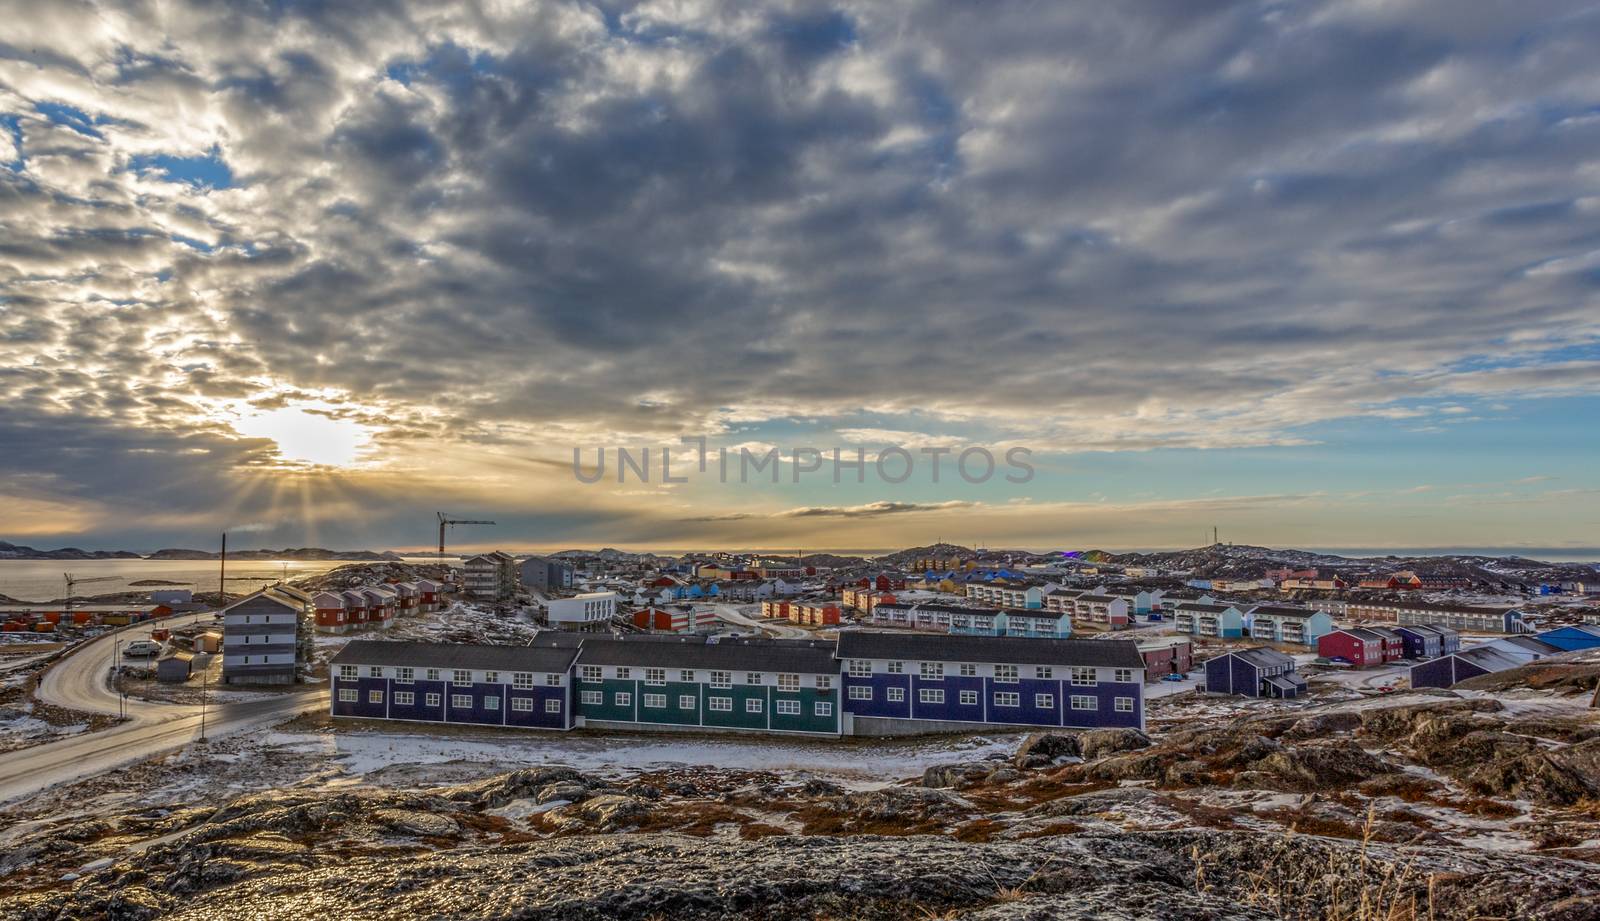 Grenlandic arctic city panorama with houses on the rocky hills in sunset city panorama. Nuuk, Greenland